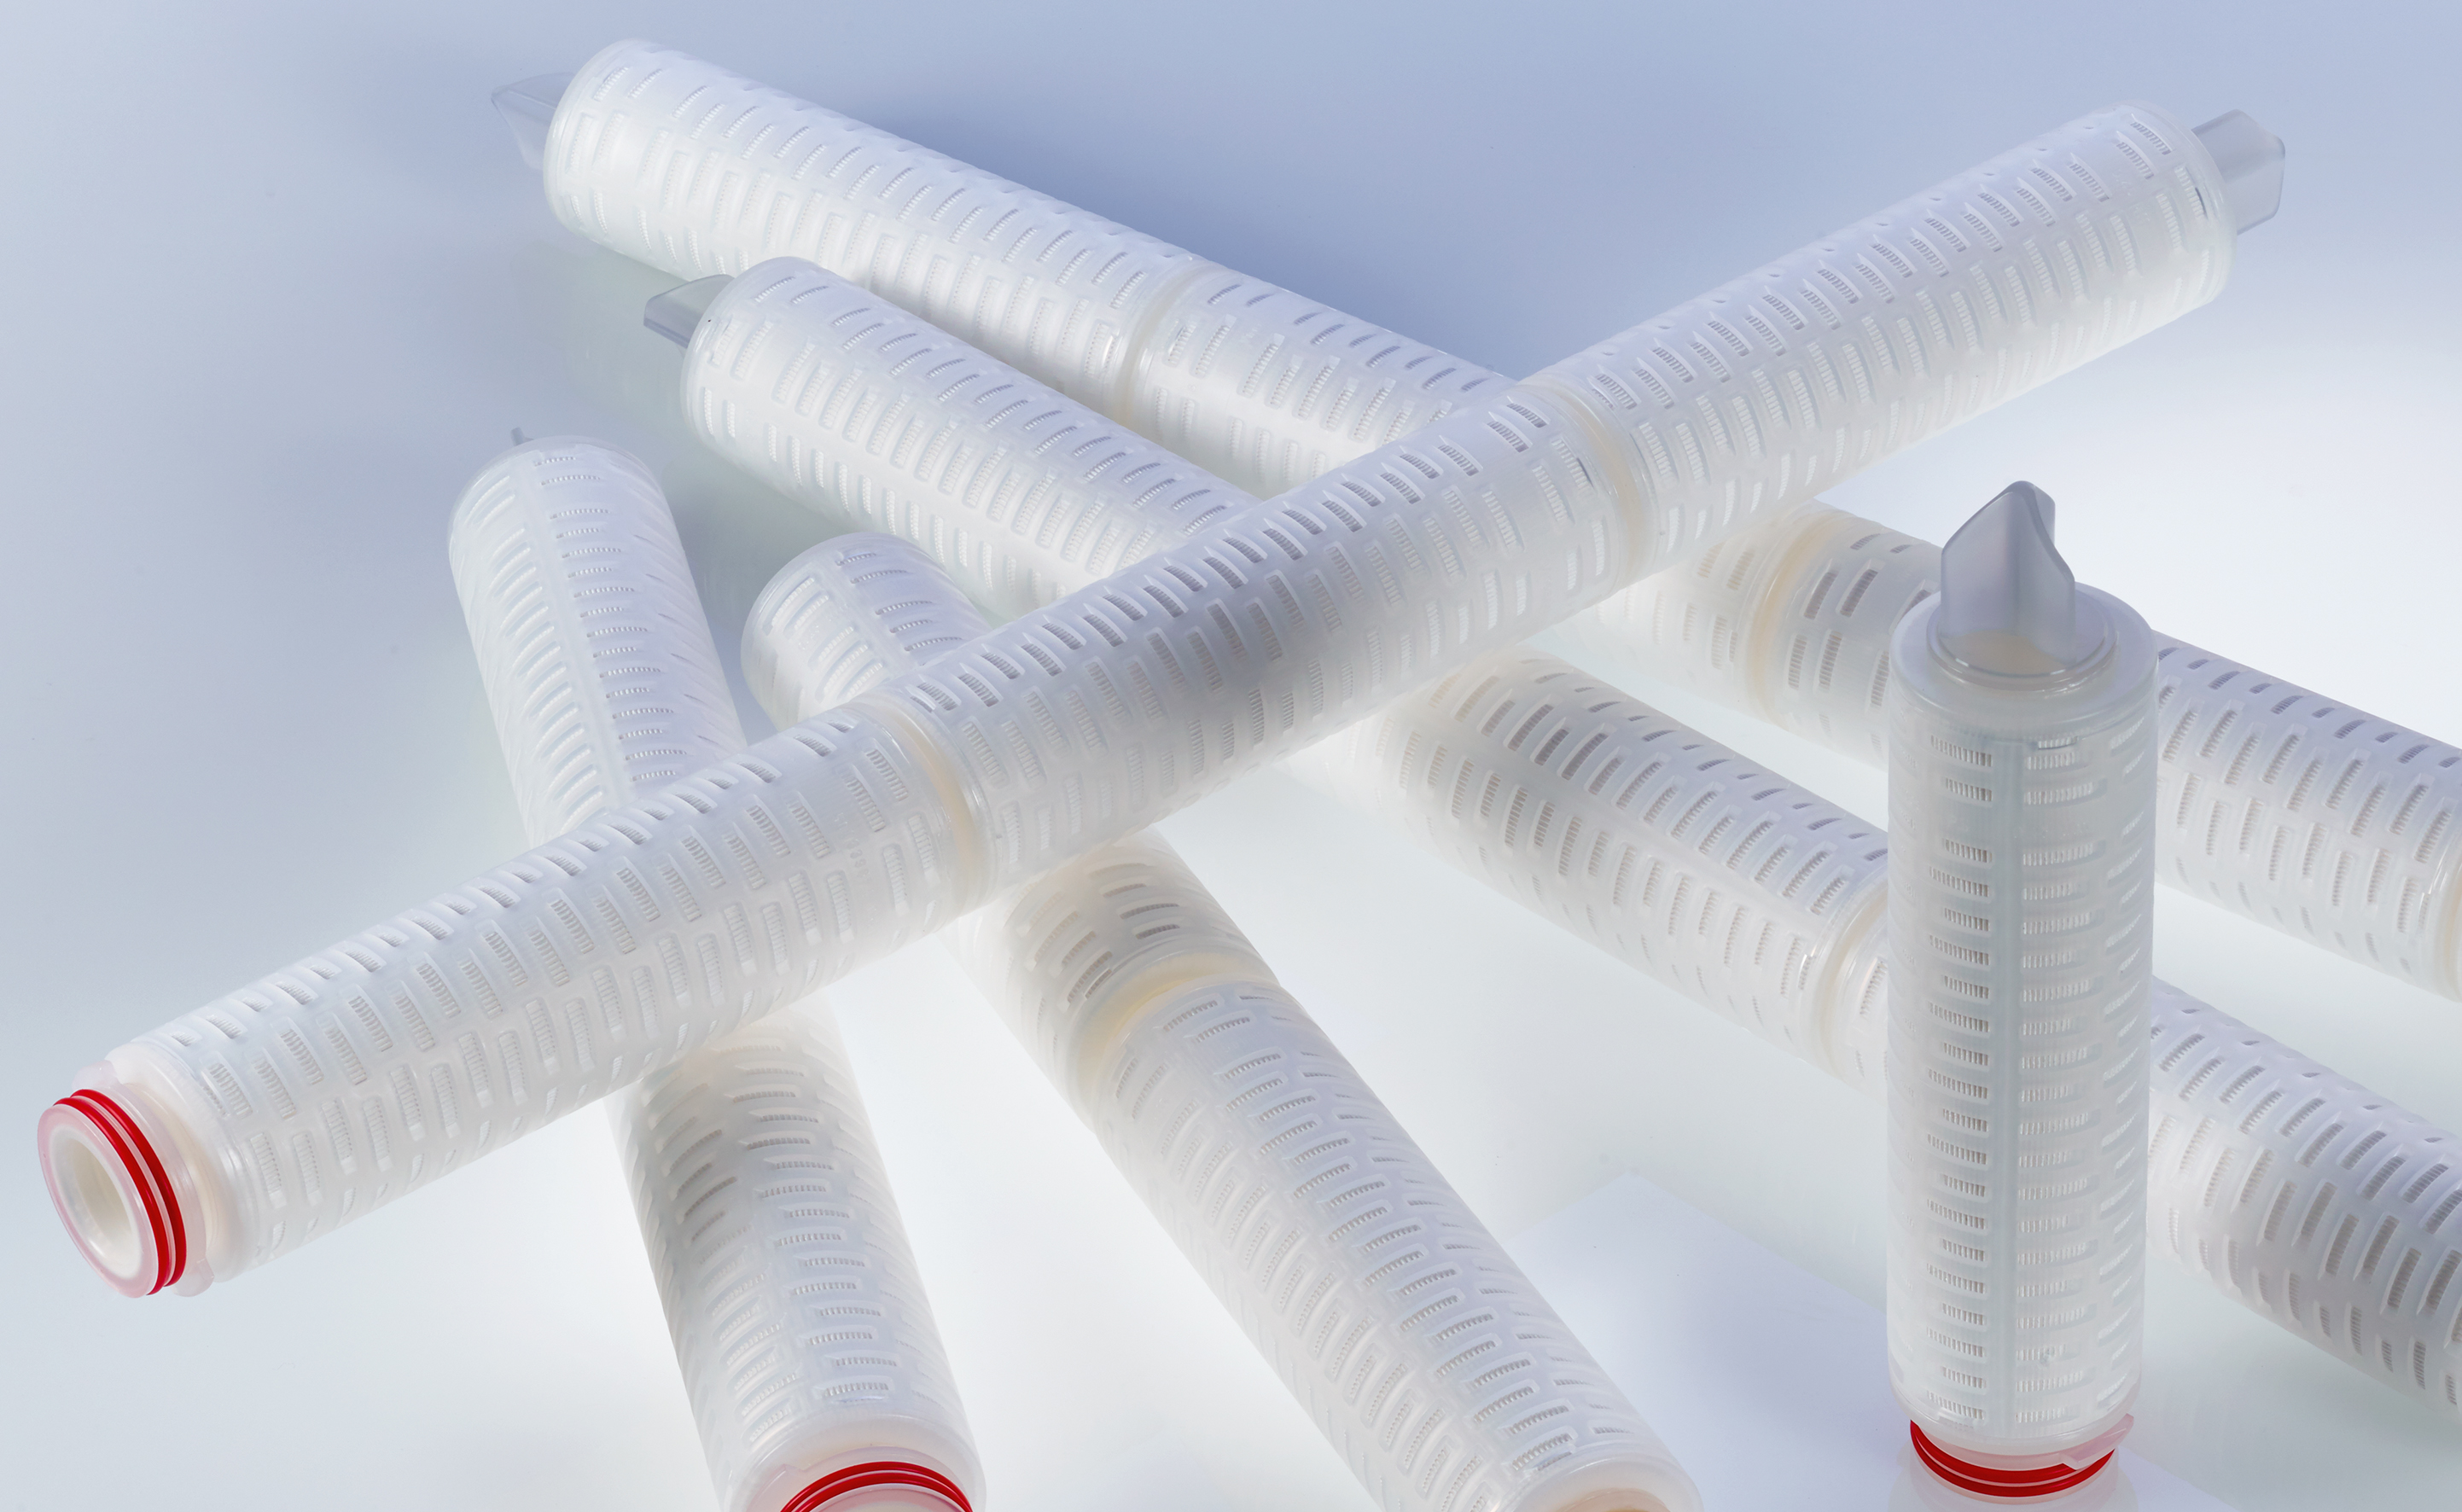 The membrane filter cartridge for sterile filtration has double-layer membranes.